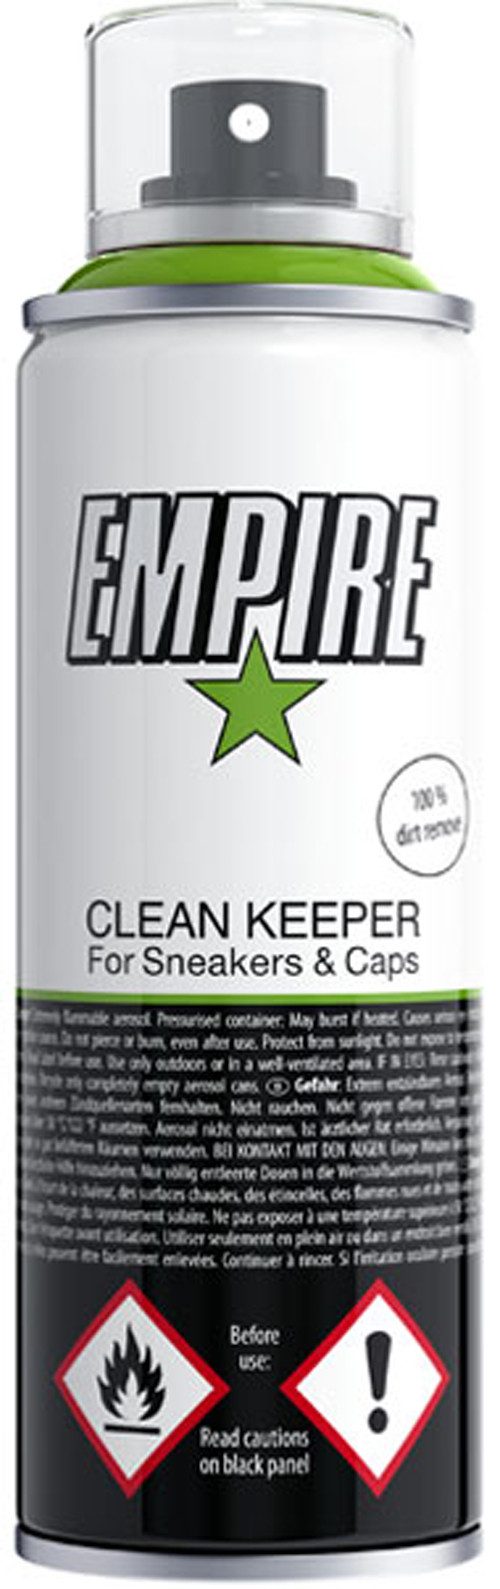 Empire Clean Keeper - Cleaner For Sneakers & Caps Schuhreiniger